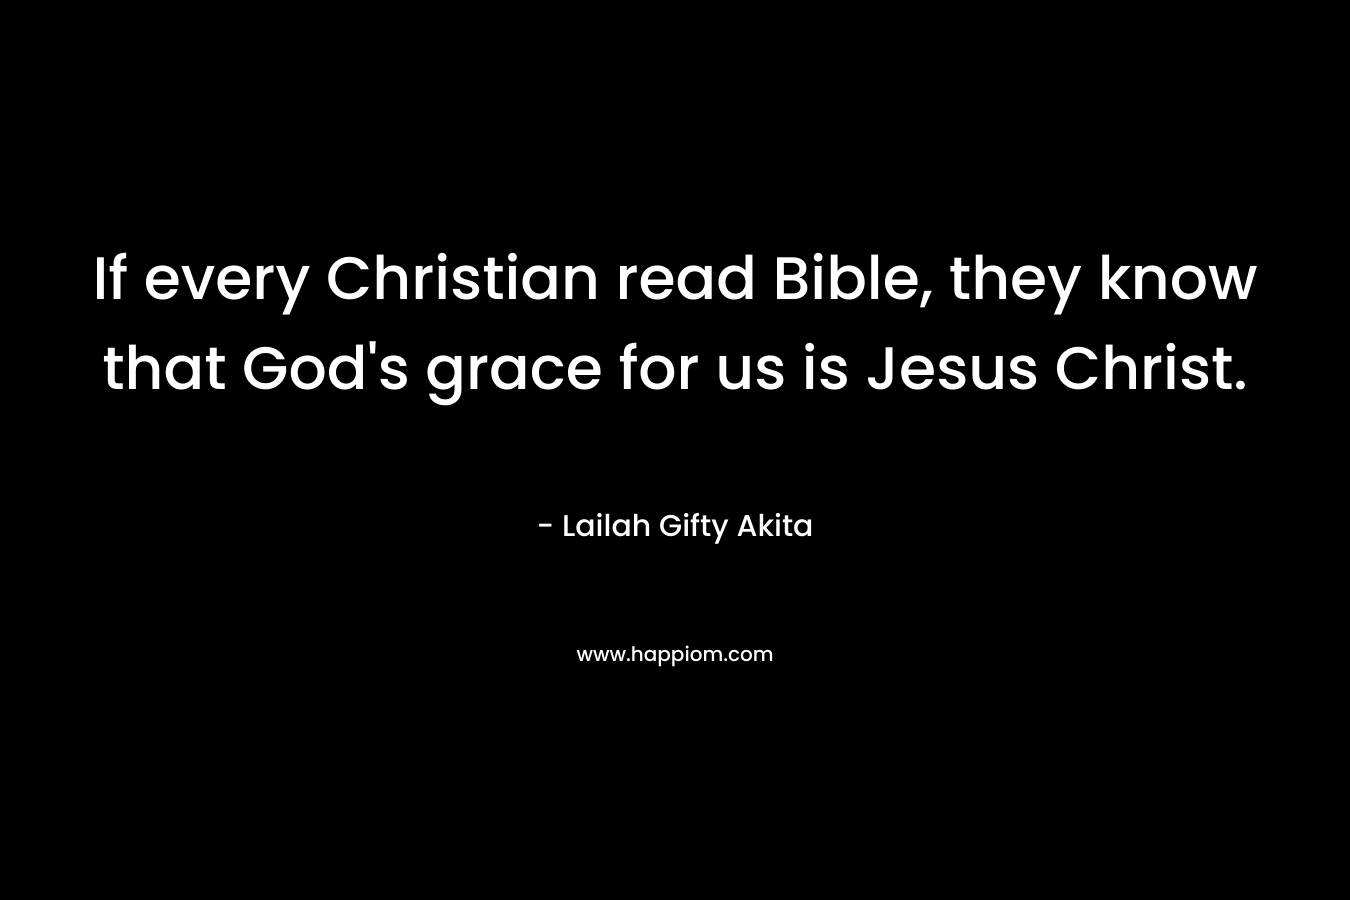 If every Christian read Bible, they know that God's grace for us is Jesus Christ.